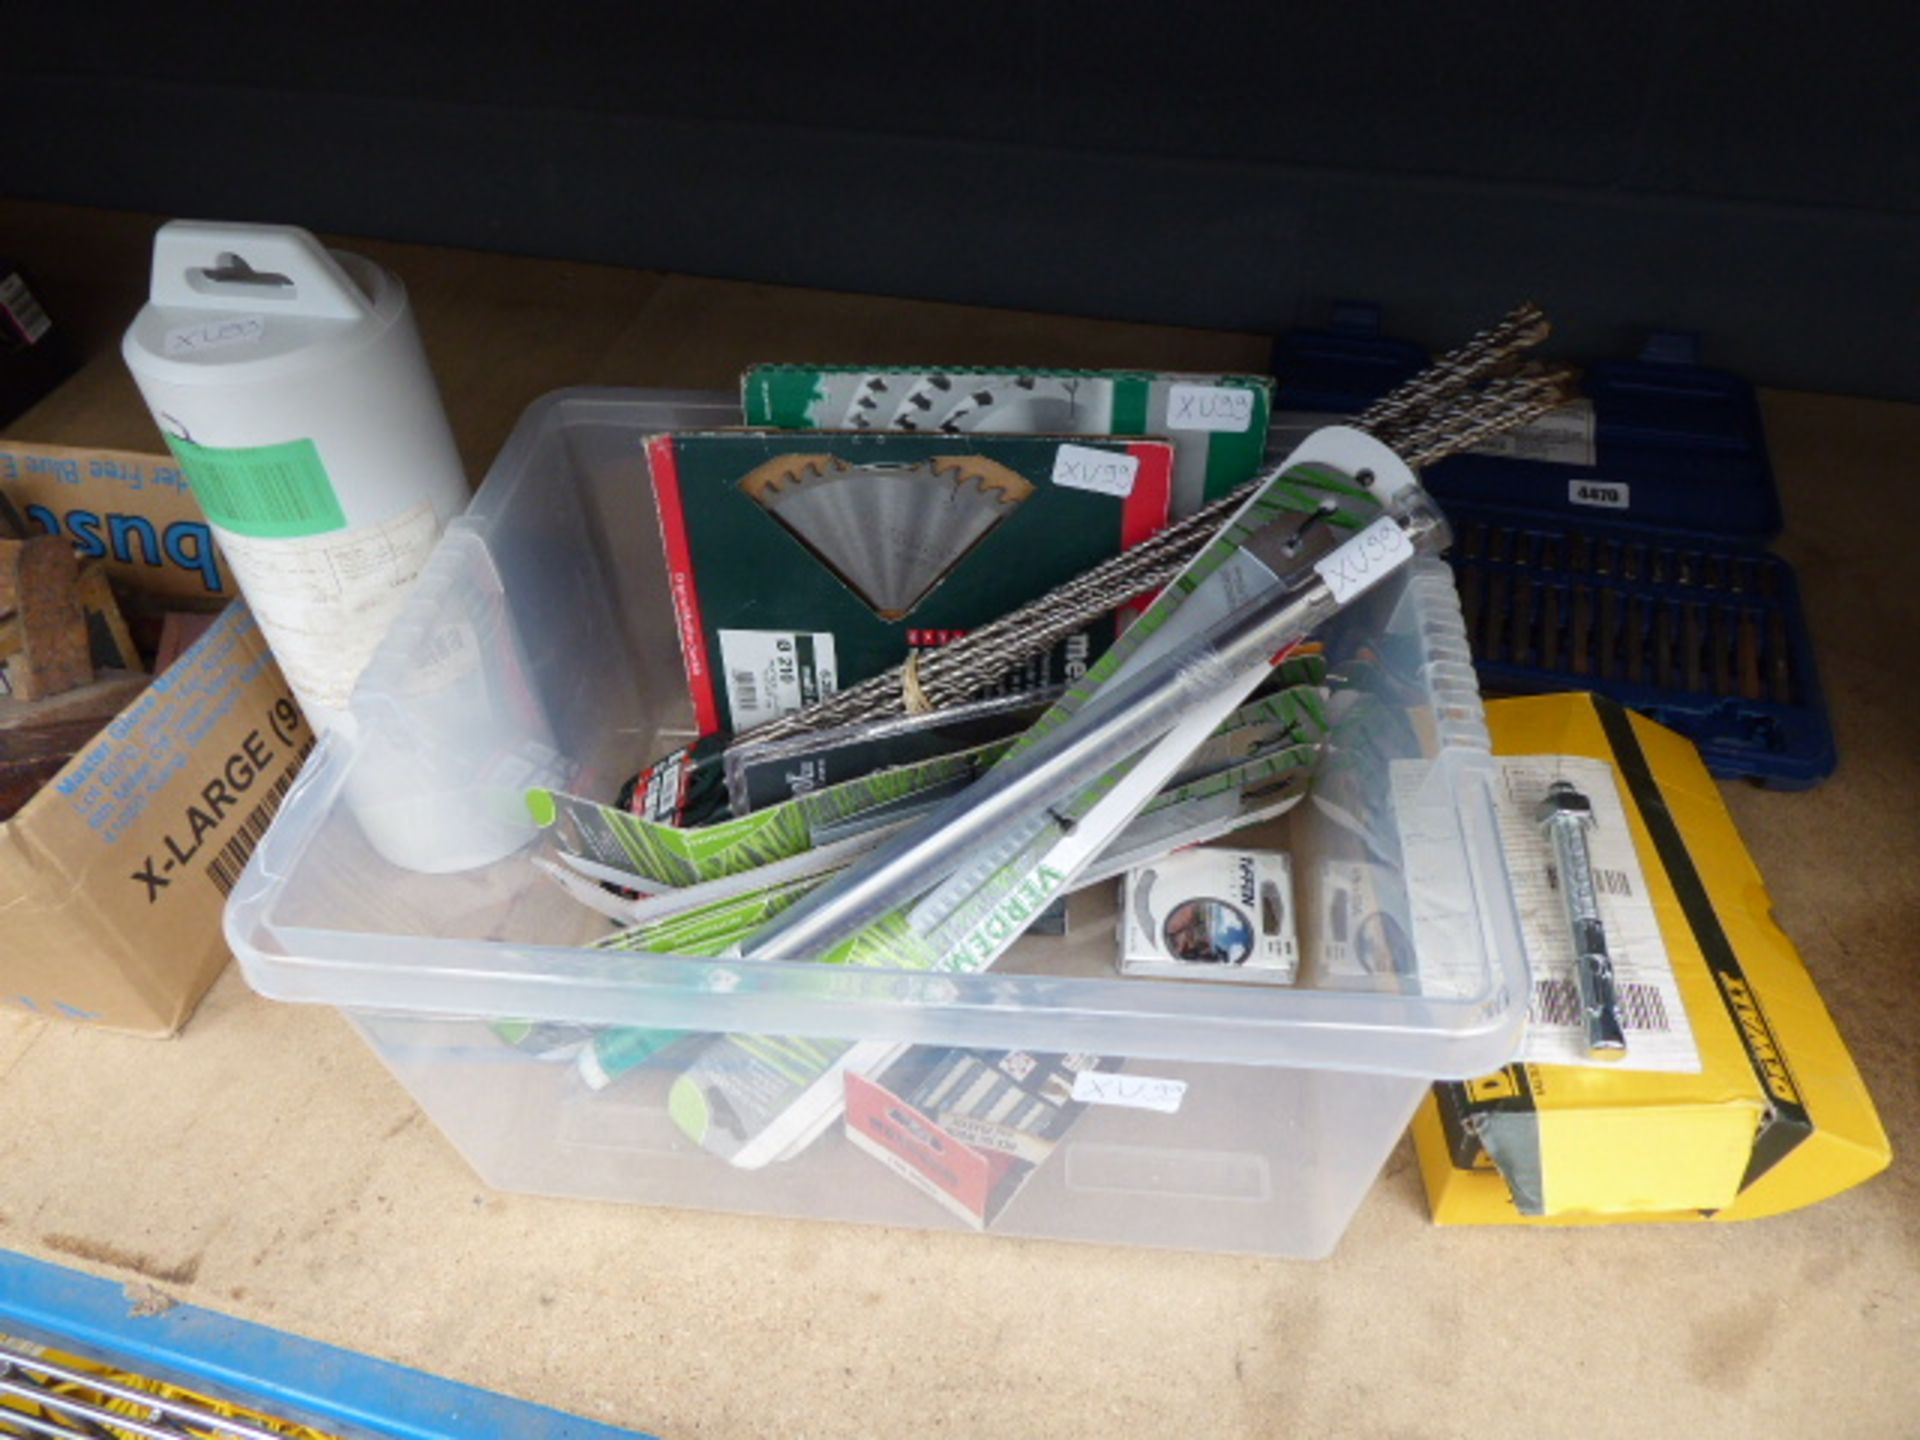 Large Hitachi tool bits, quantity of drill bits, dewalt fixings, tail bow saw blades and other